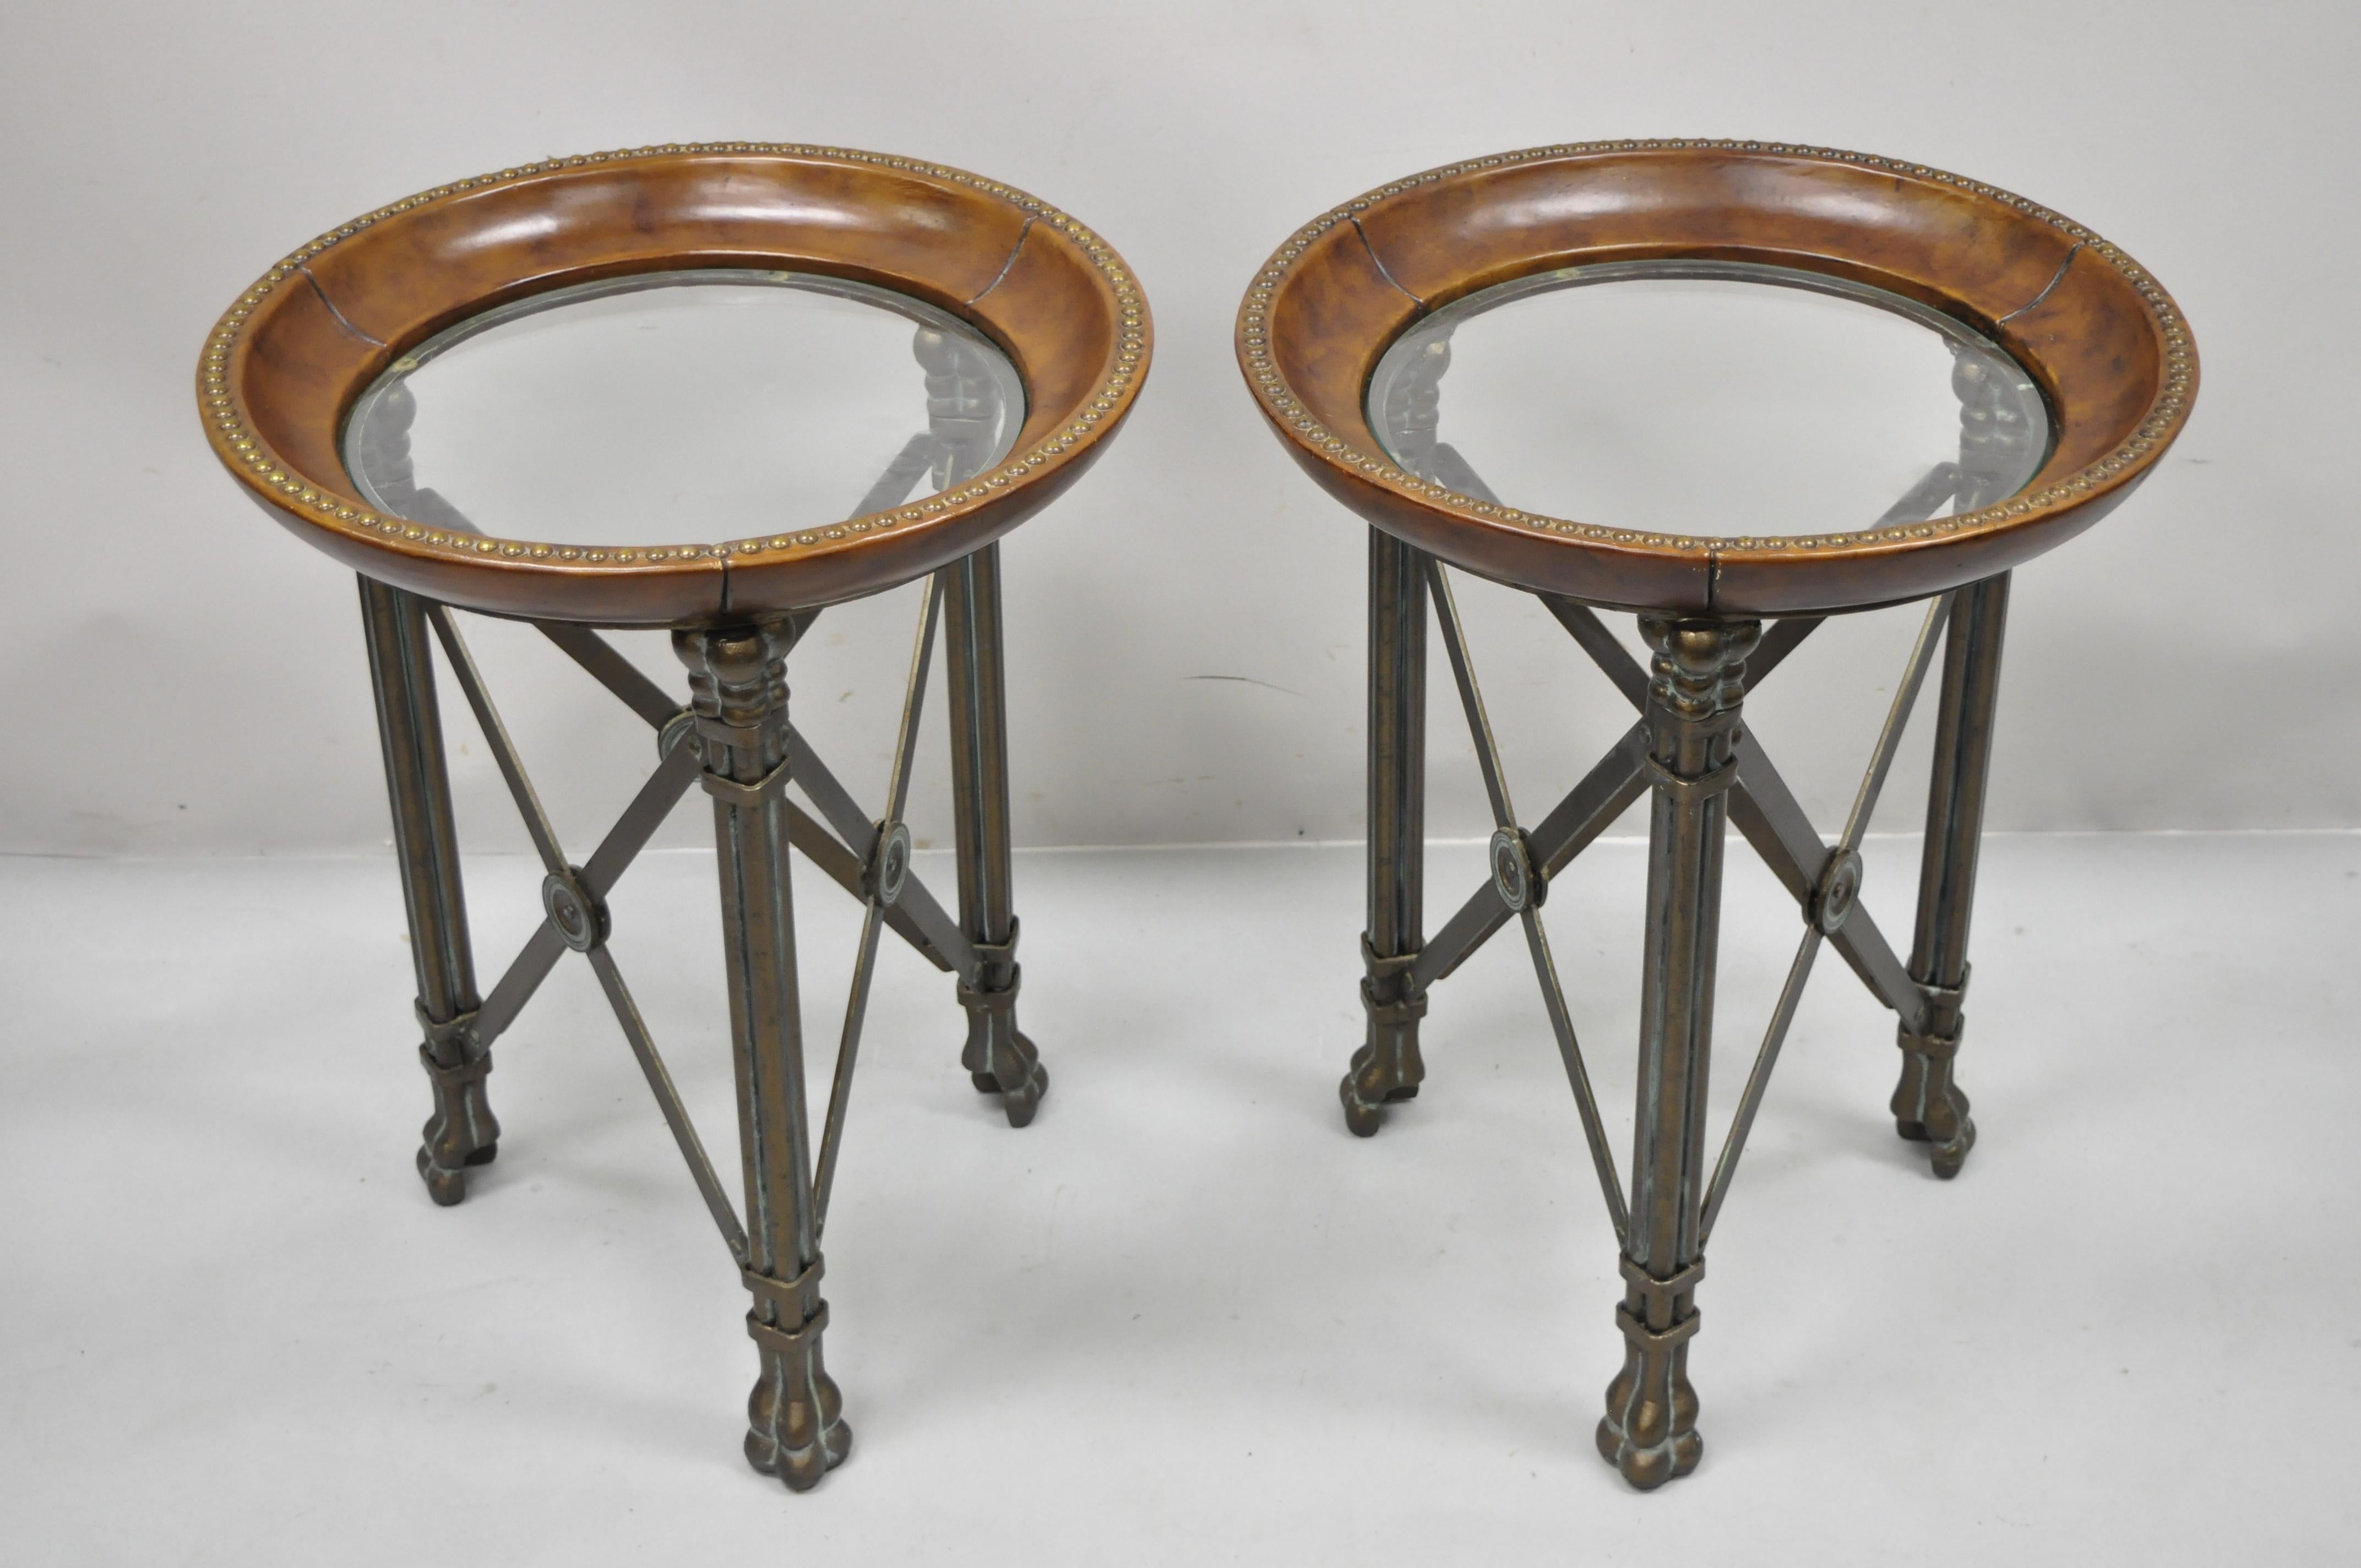 Regency Iron Brown Leather Round Glass Top End Tables attr Maitland Smith, Pair 5